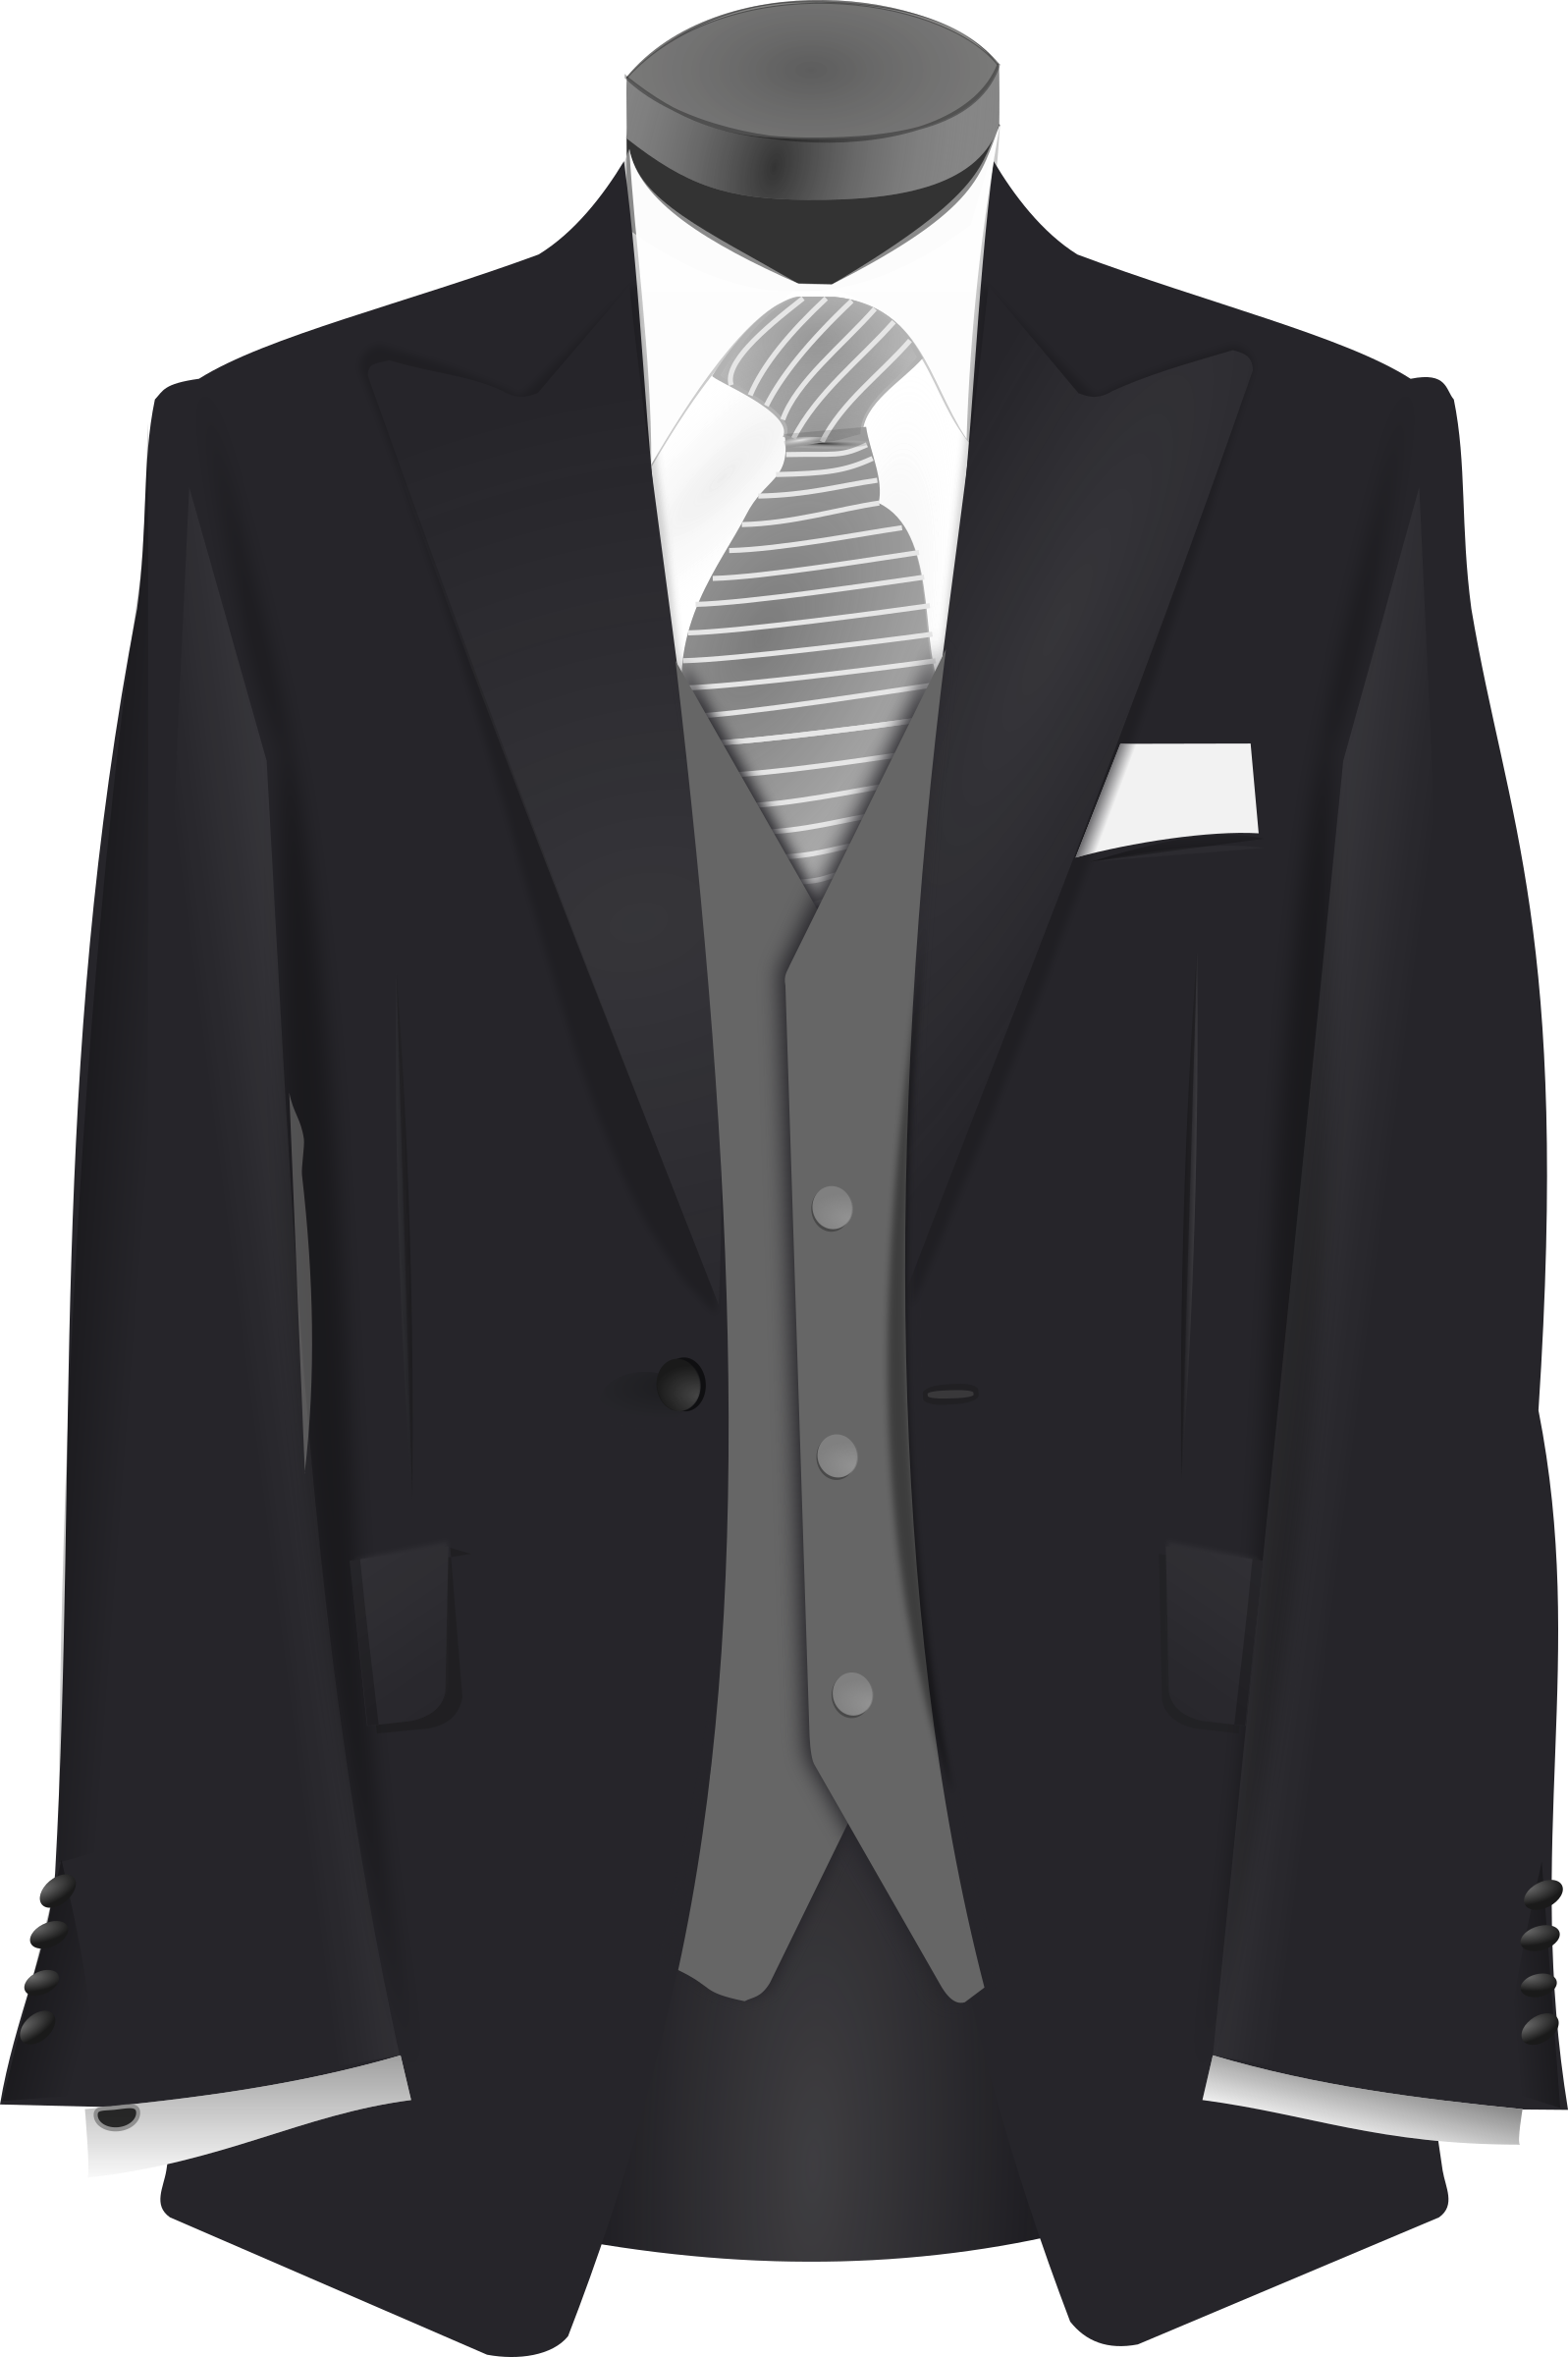 Wedding Suit Vector  Clipart image Free stock photo 